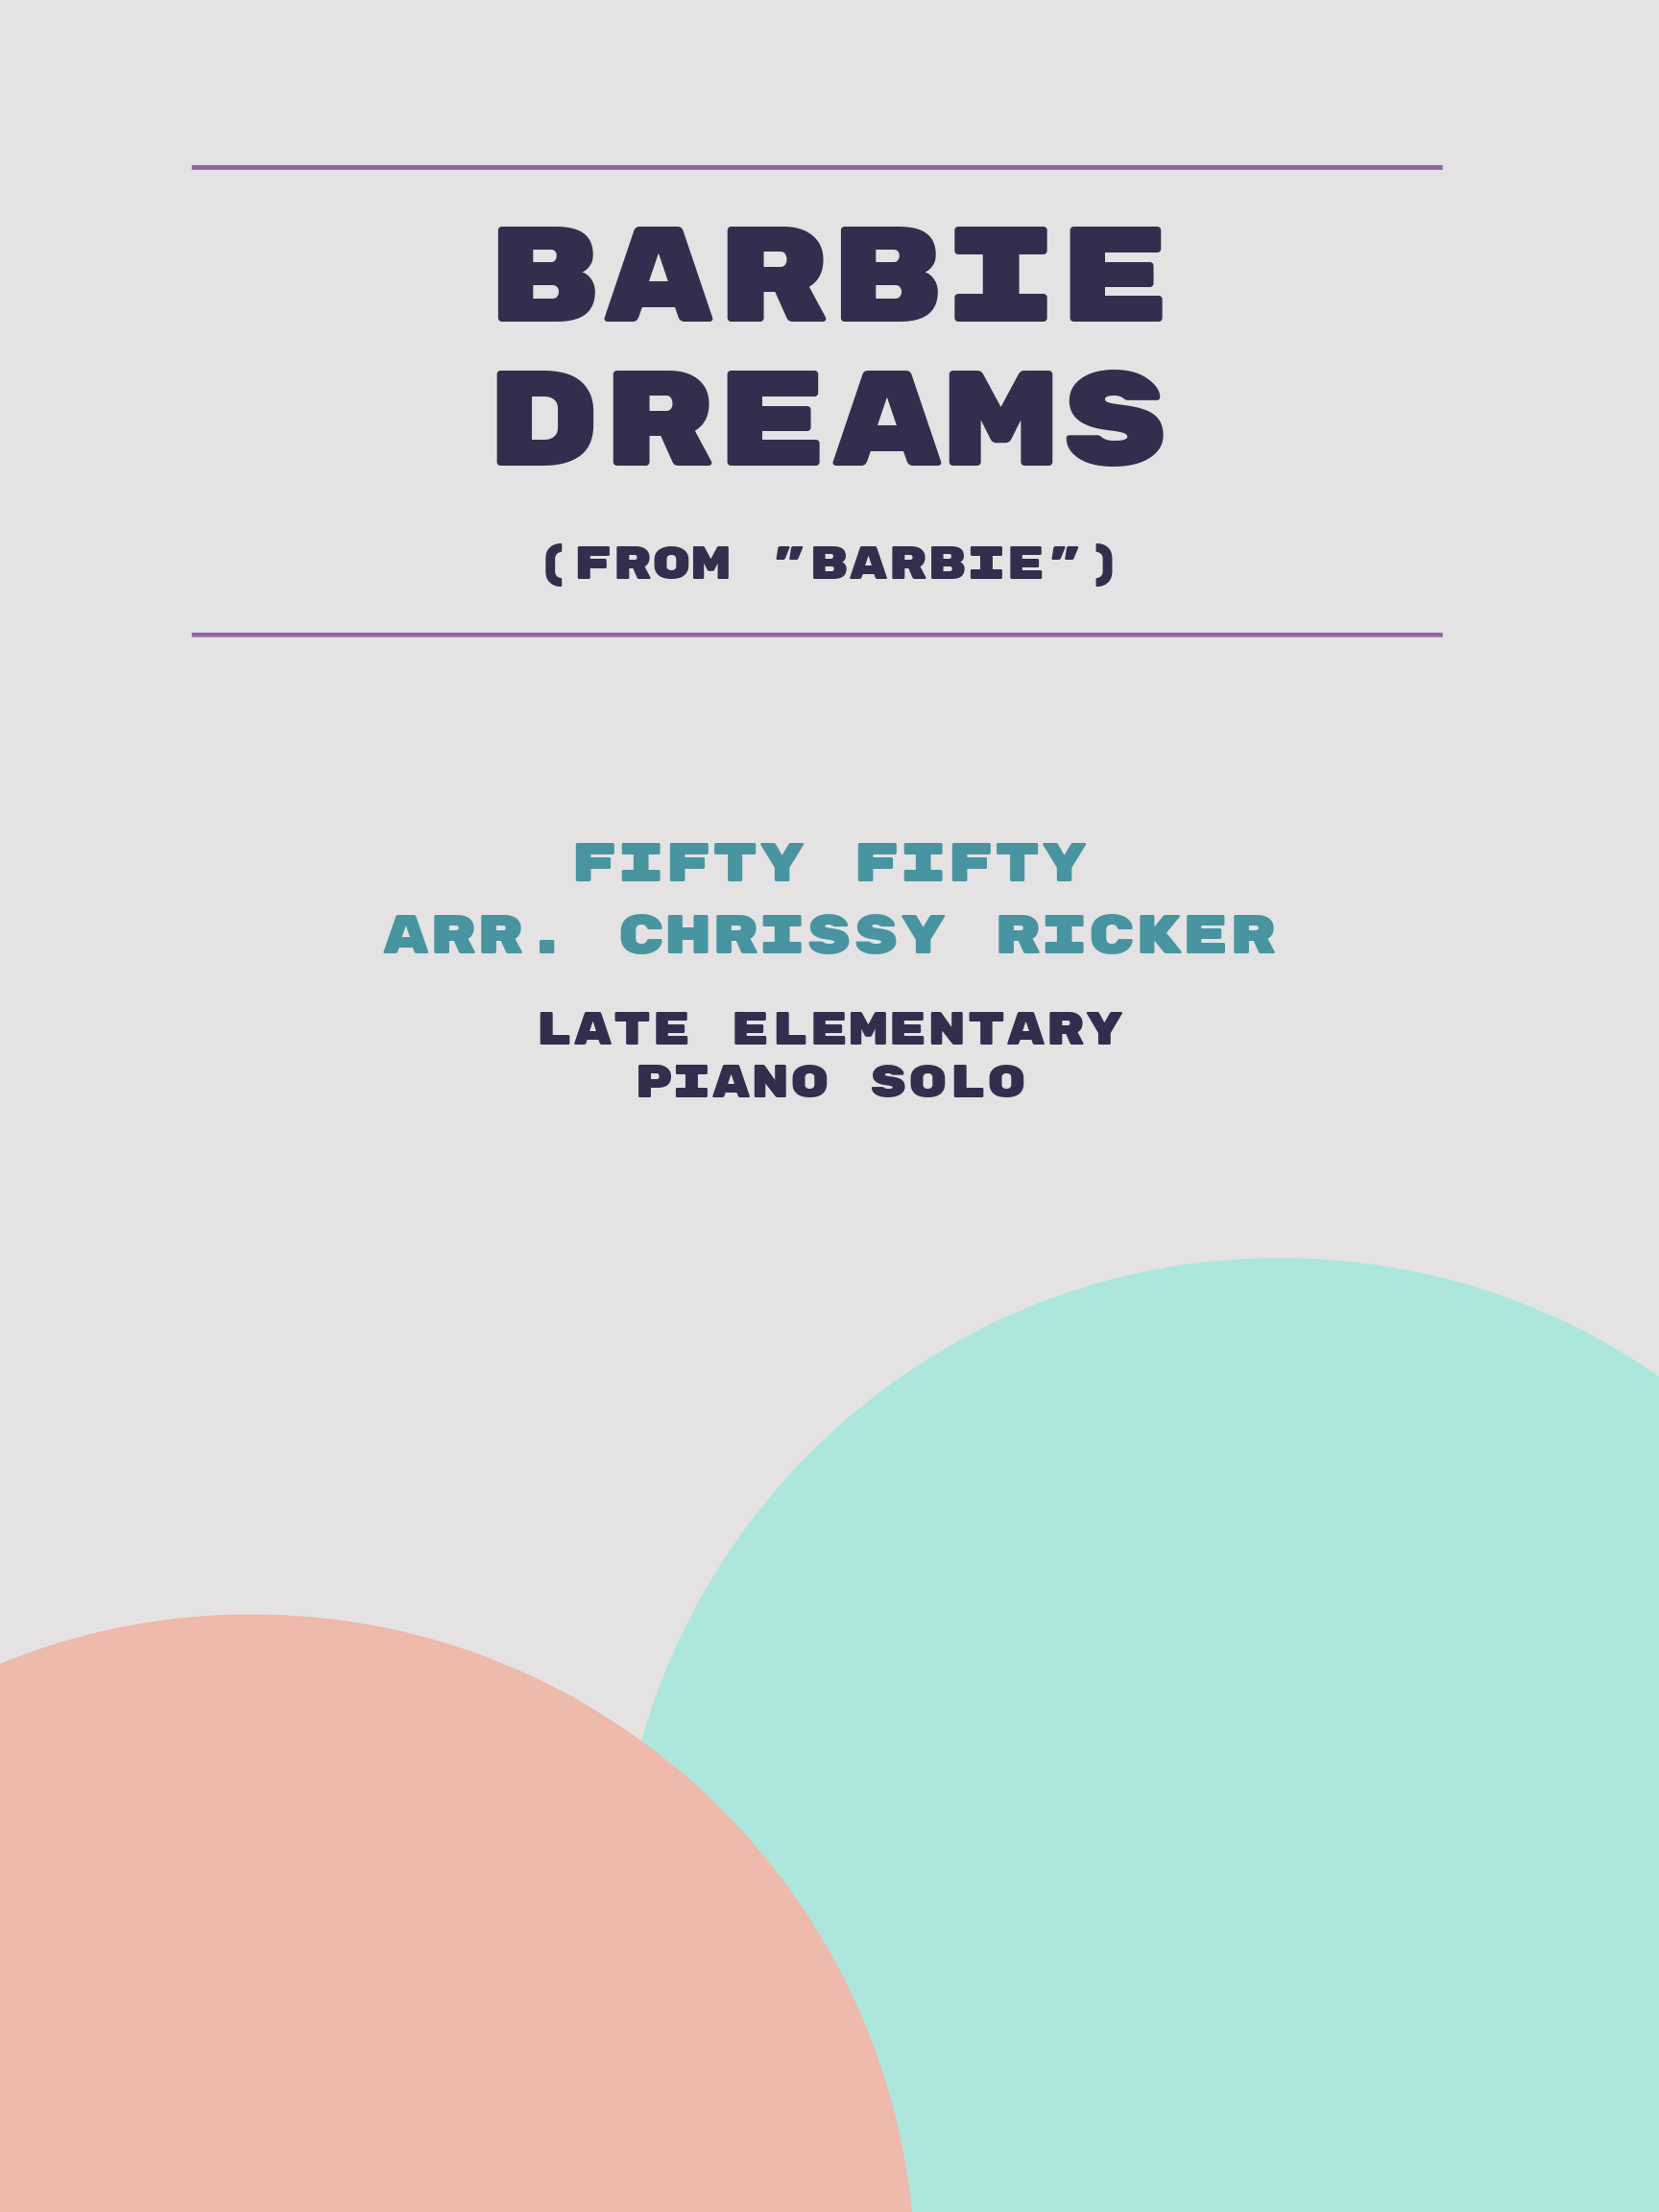 Barbie Dreams by FIFTY FIFTY